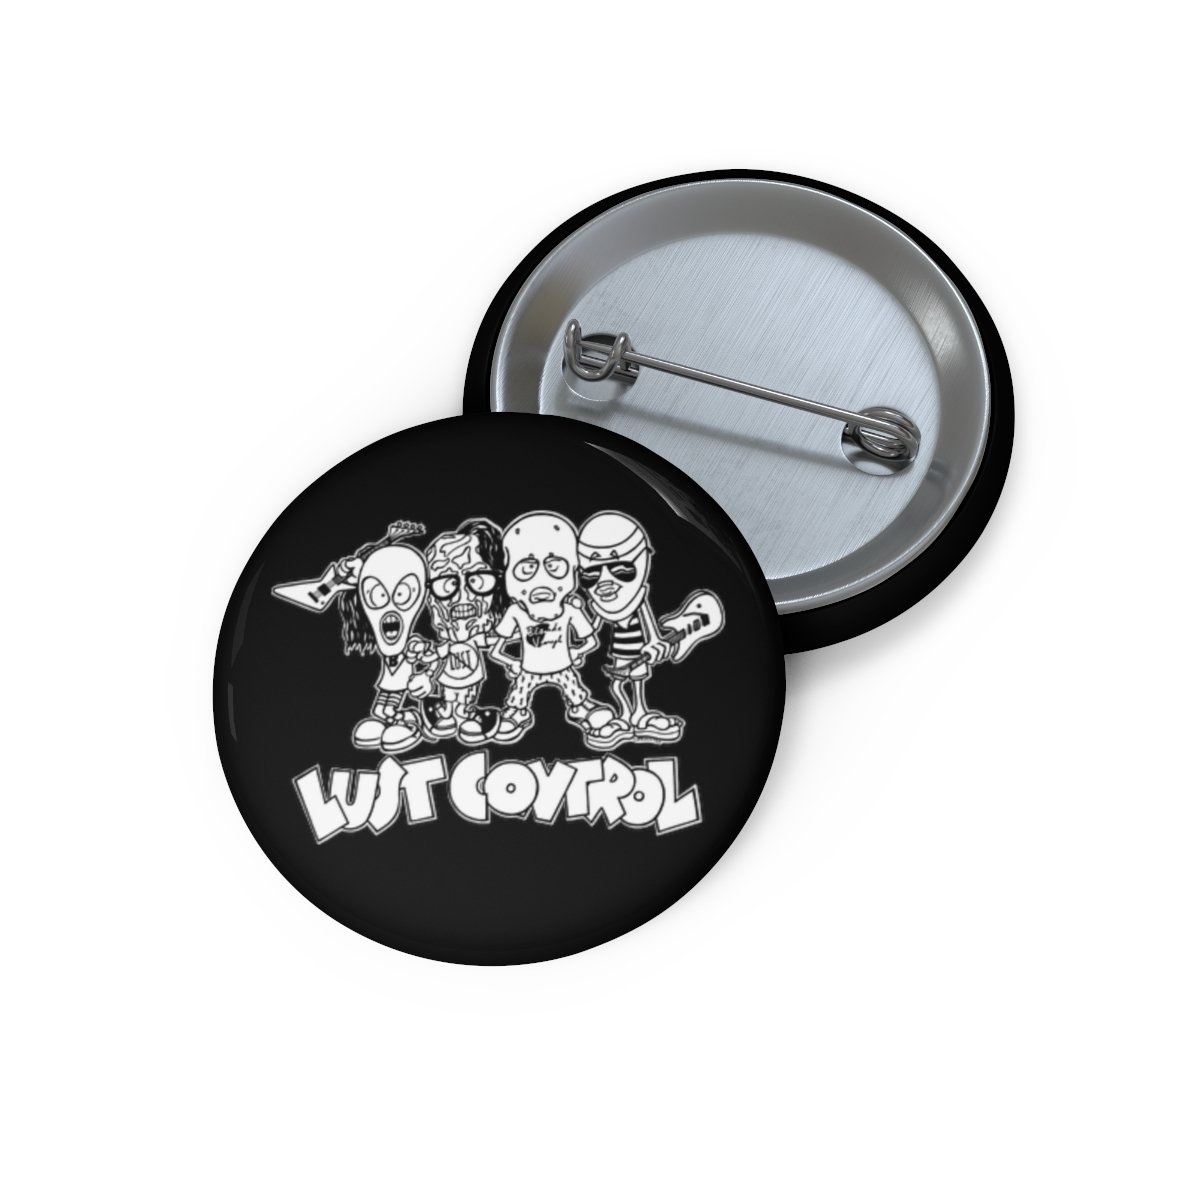 Lust Control Cartoon Characters Pin Buttons